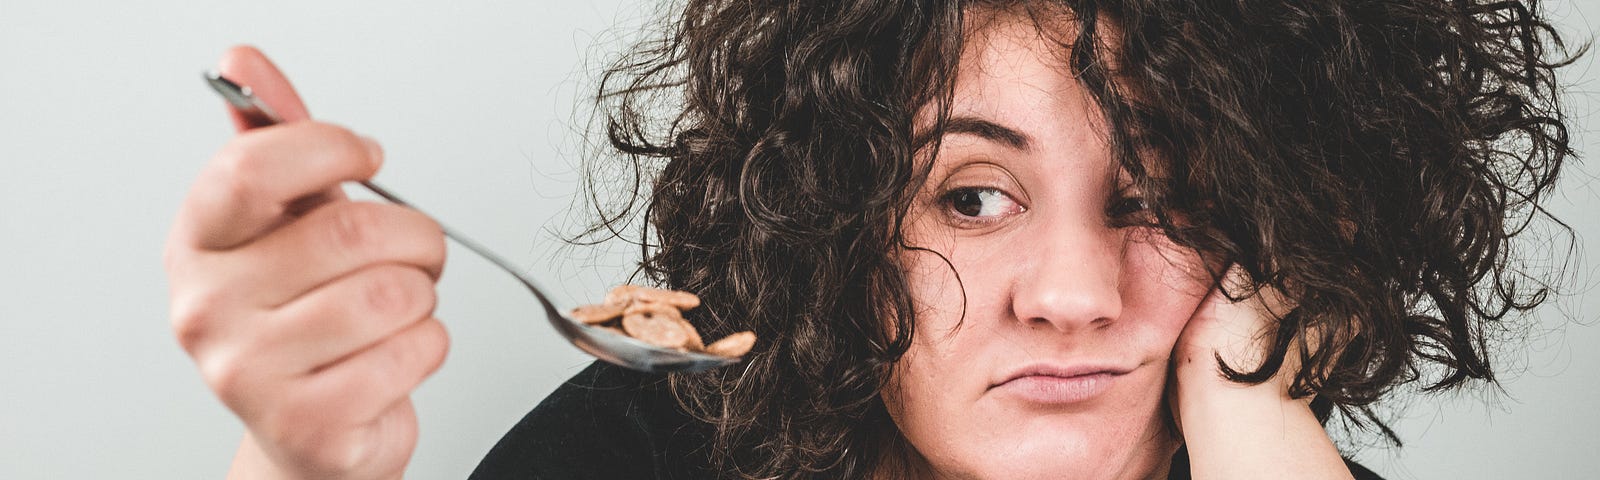 woman eating cereal with a bored expression on her face